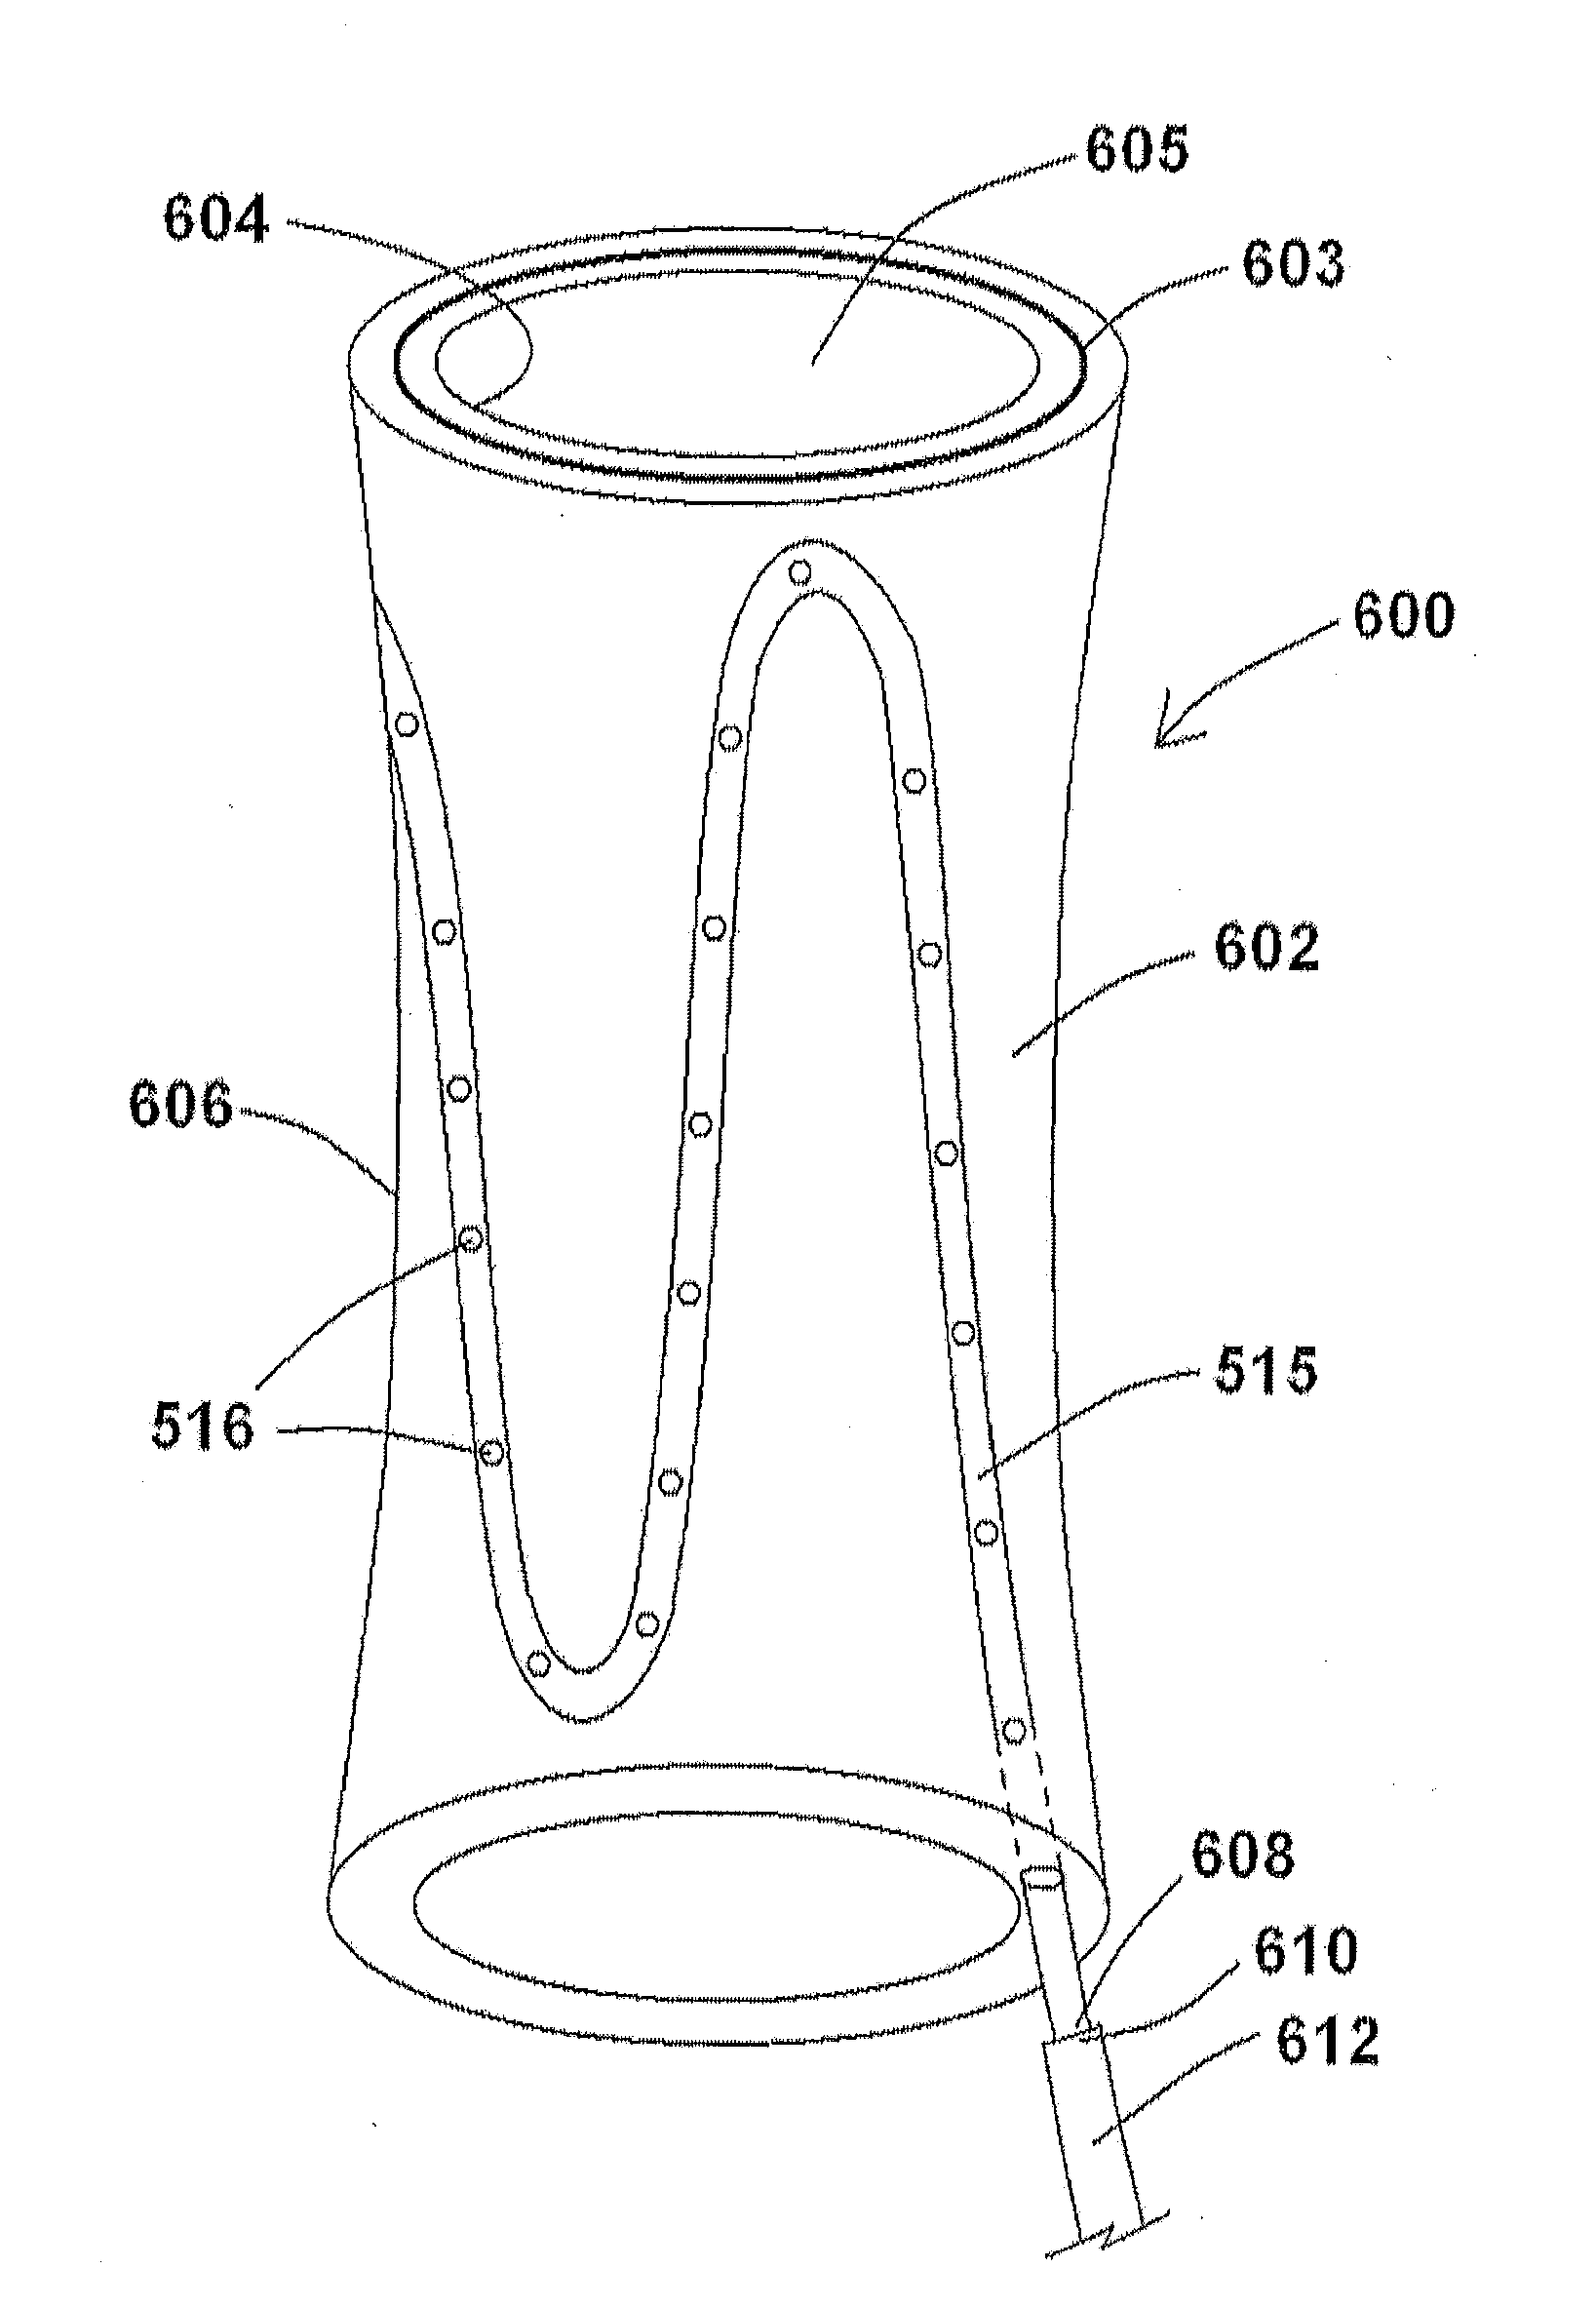 Endoprosthesis assemblies and methods for using the same